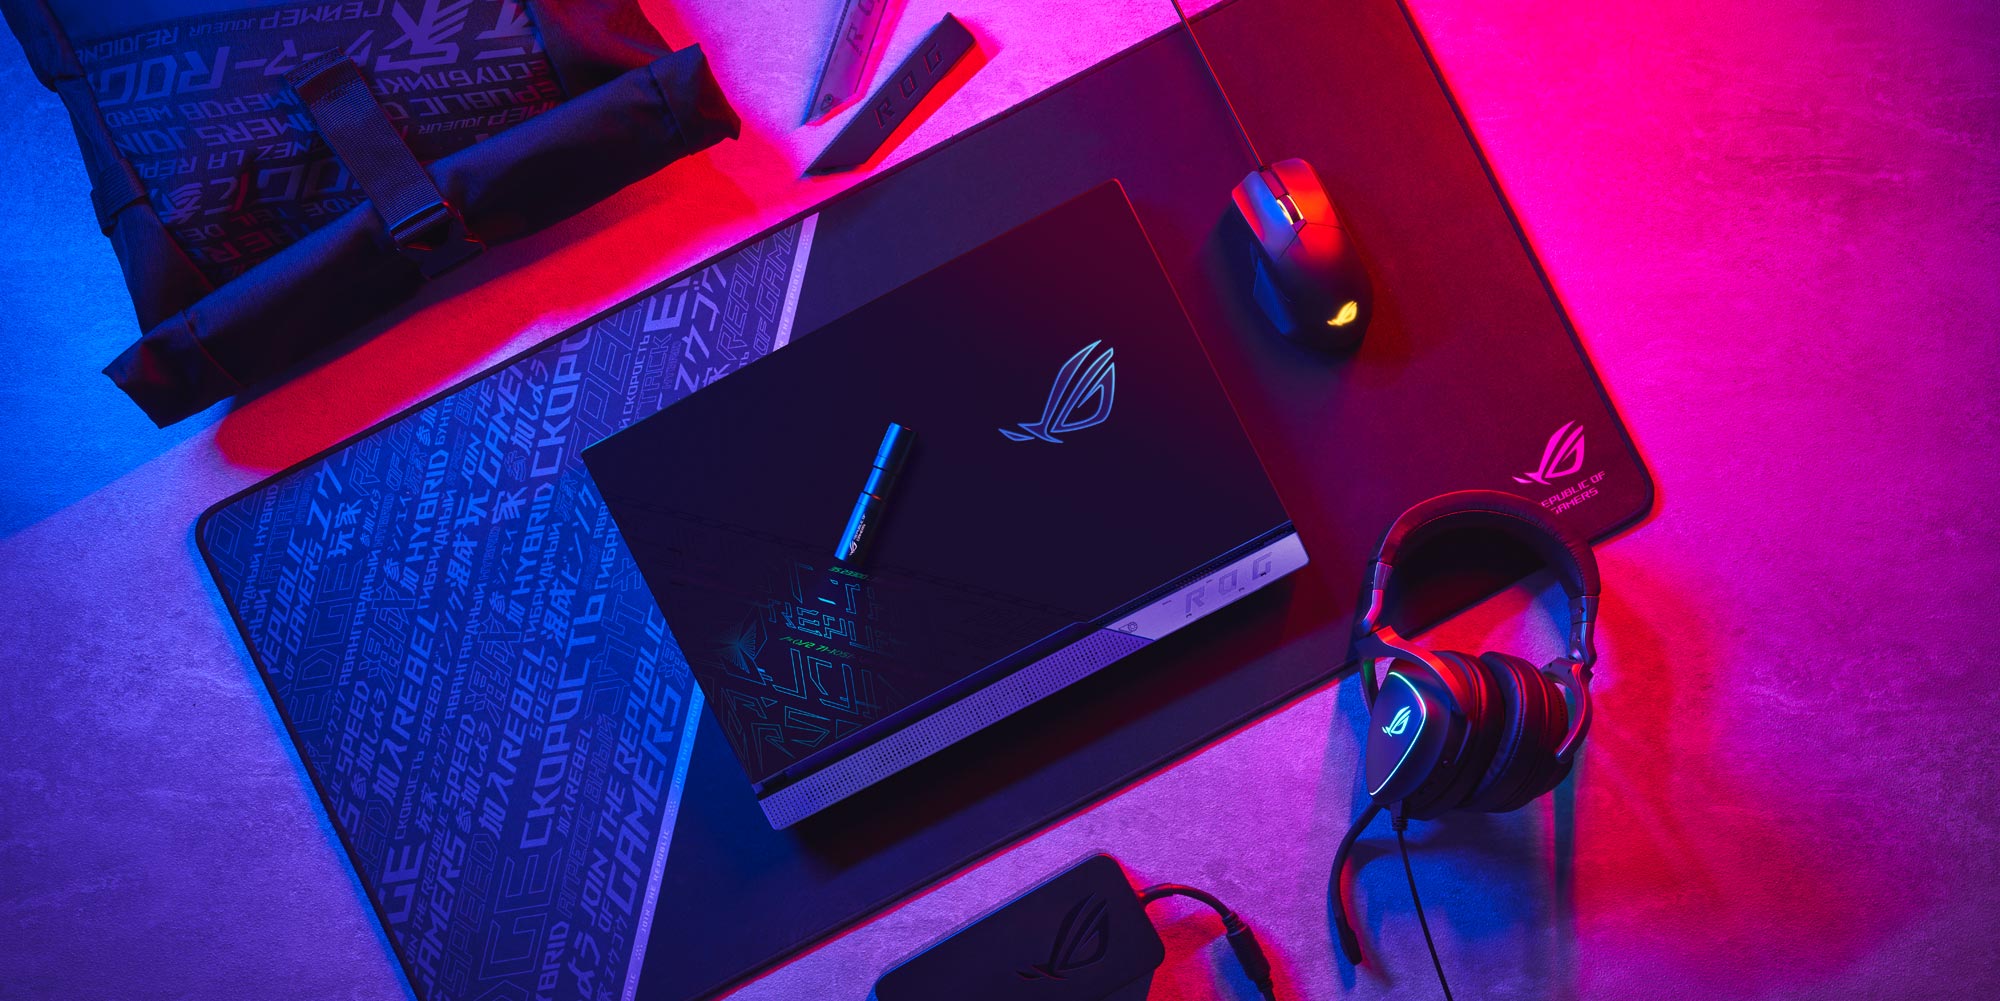 An image of the ROG Strix SCAR 17 SE sitting on a desk mat, with the lid closed, surrounded by a mouse, backpack, and charger.